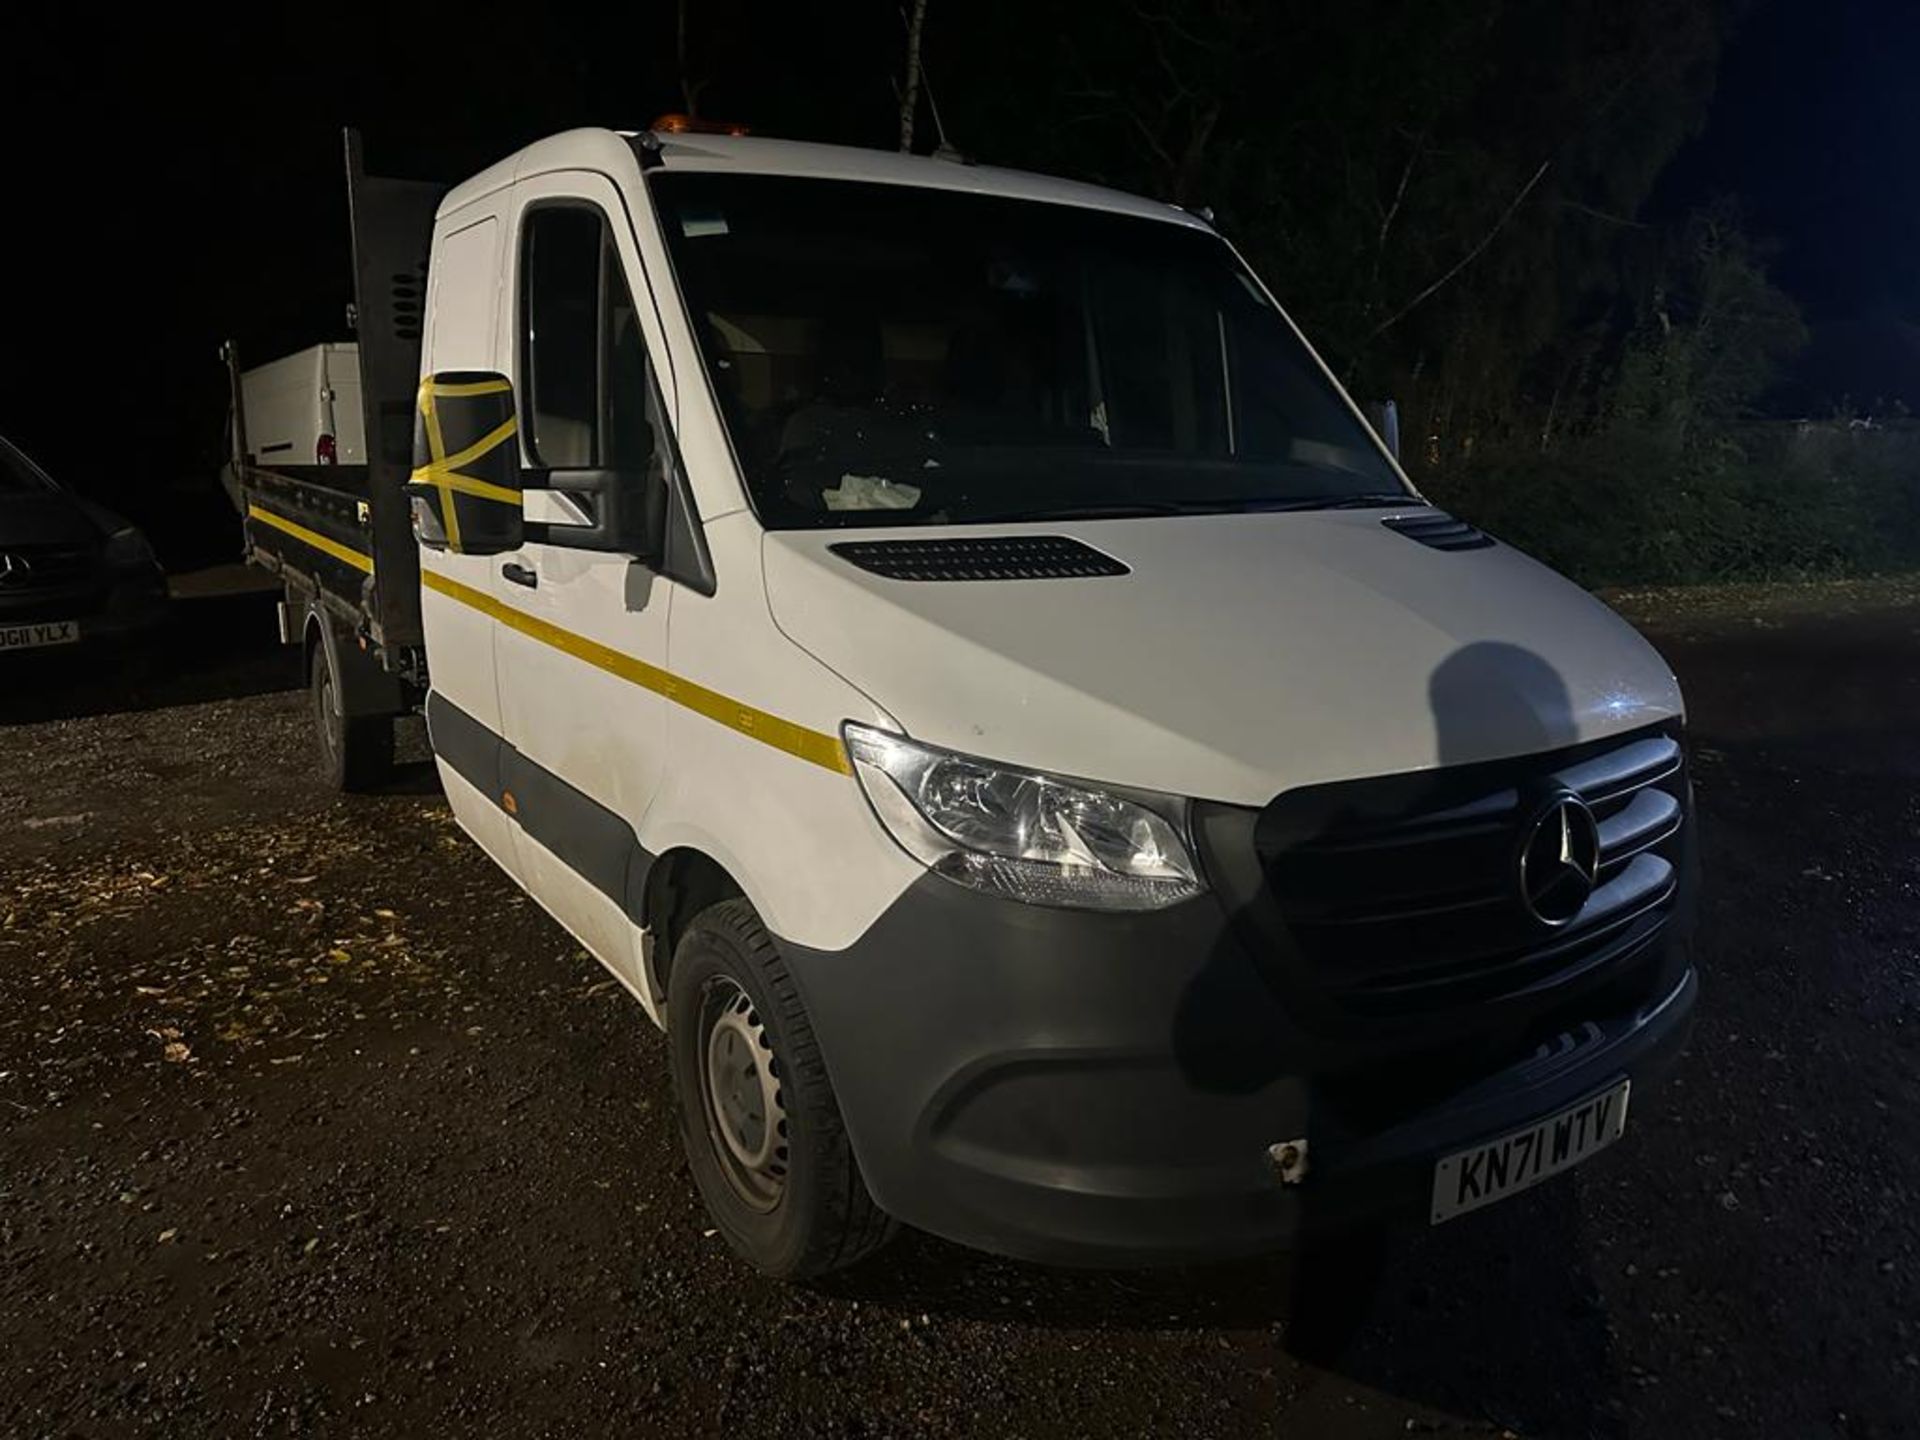 2021 71 MERCEDES SPRINTER CREW CAB TIPPER - EURO 6 - 53K MILES - 3 SEATS AND TOOL STORAGE - Image 2 of 11